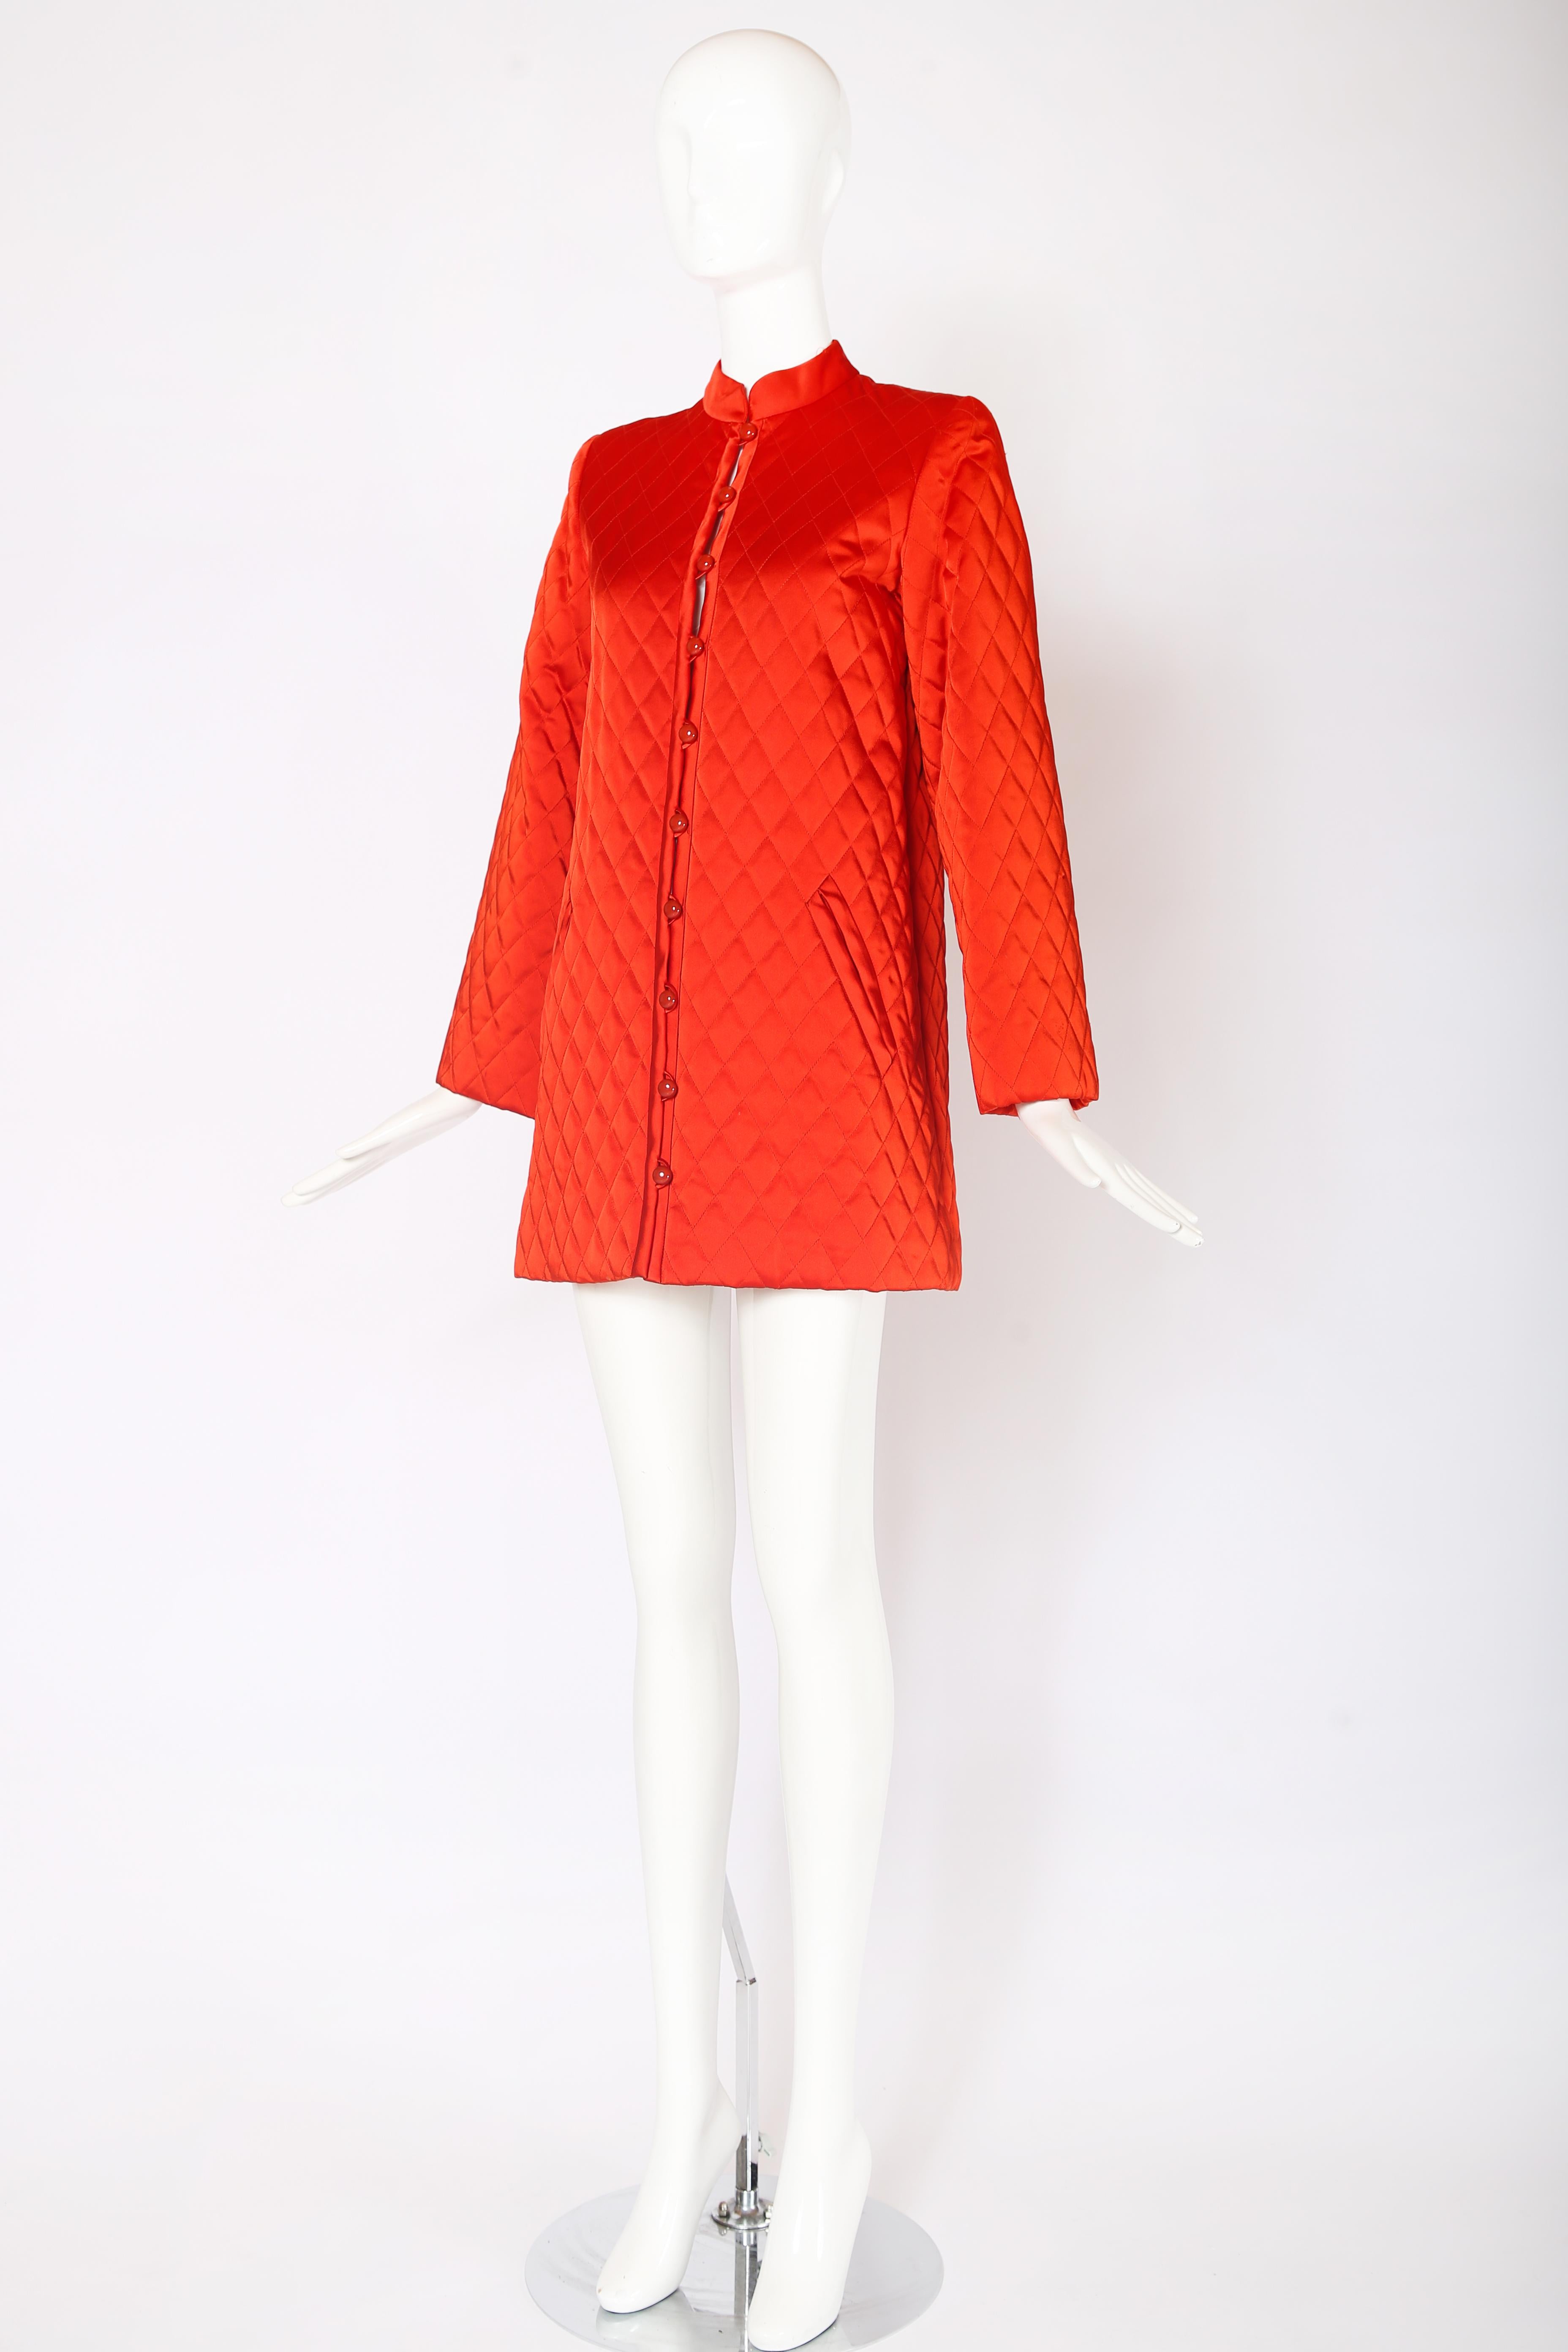 1970's Yves Saint Laurent vermillion colored quilted jacket w/a satin sheen. Features frontal slash pockets and shiny domed orange button loop closures down center front. In excellent condition. Size 38, 100% Rayon. Made in France.